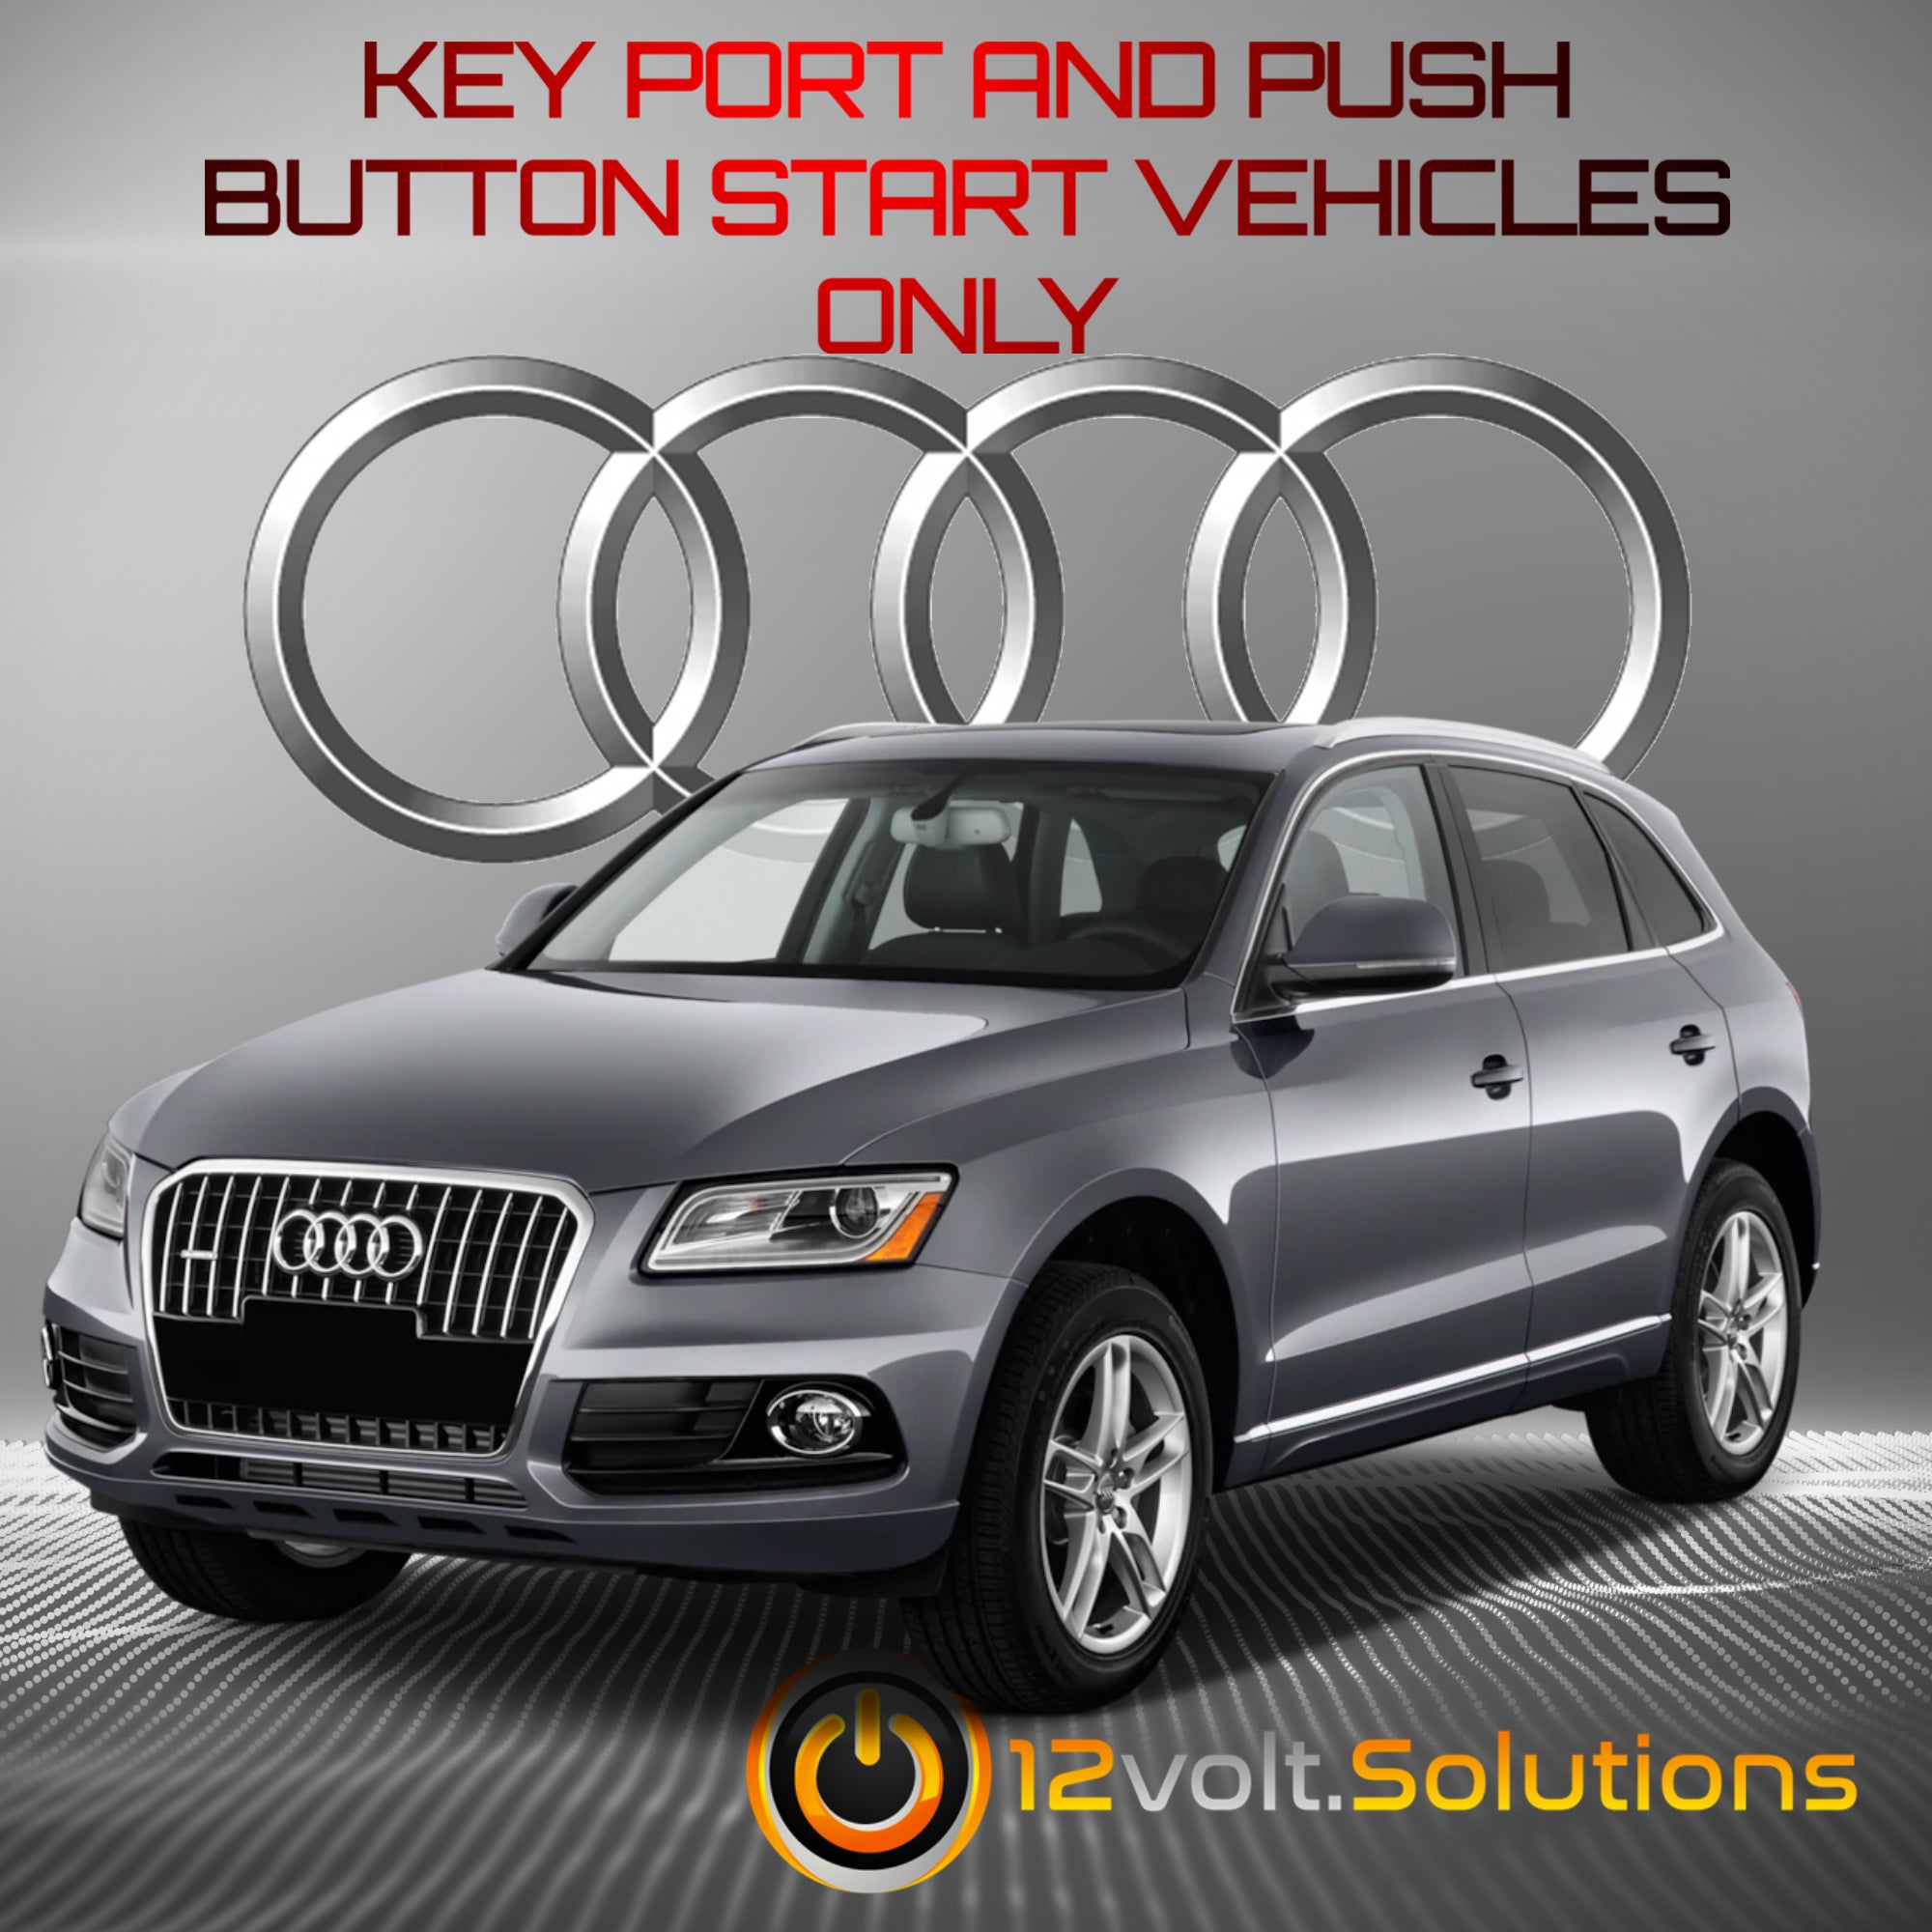 2009-2017 Audi Q5 Plug and Play Remote Start Kit-12Volt.Solutions